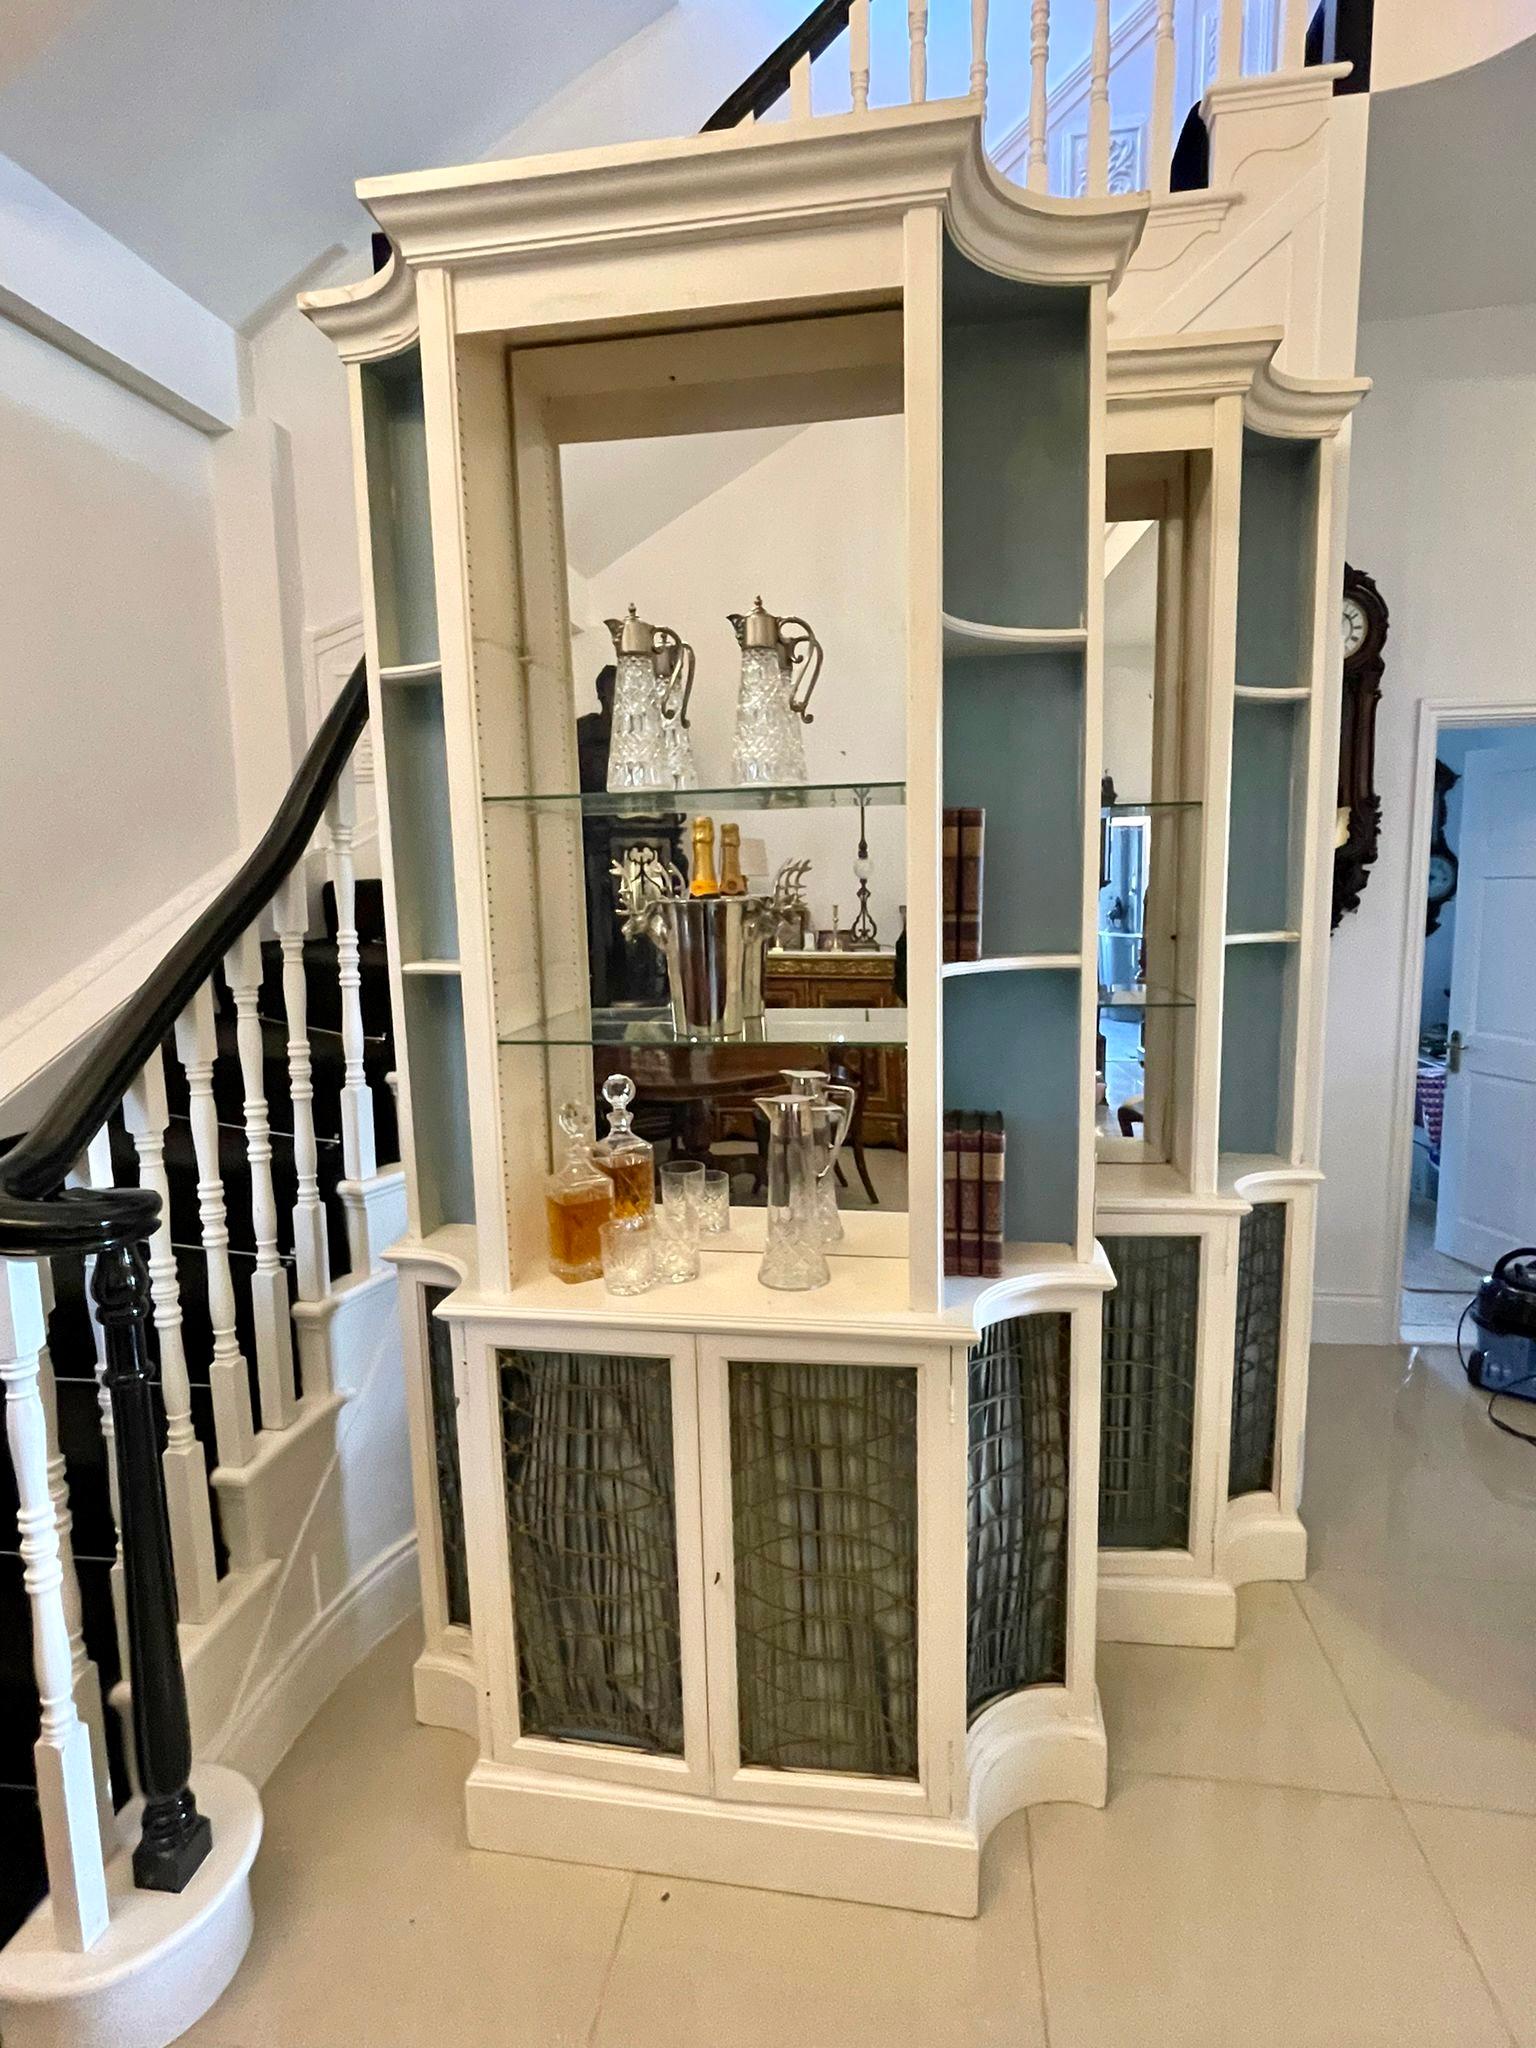 Large pair of regency style quality breakfront bookcases having a pair of white painted regency style open top breakfront bookcases above a pair of brass grille cabinets

H 247 x W 126 x D 40cm
Date 1940
